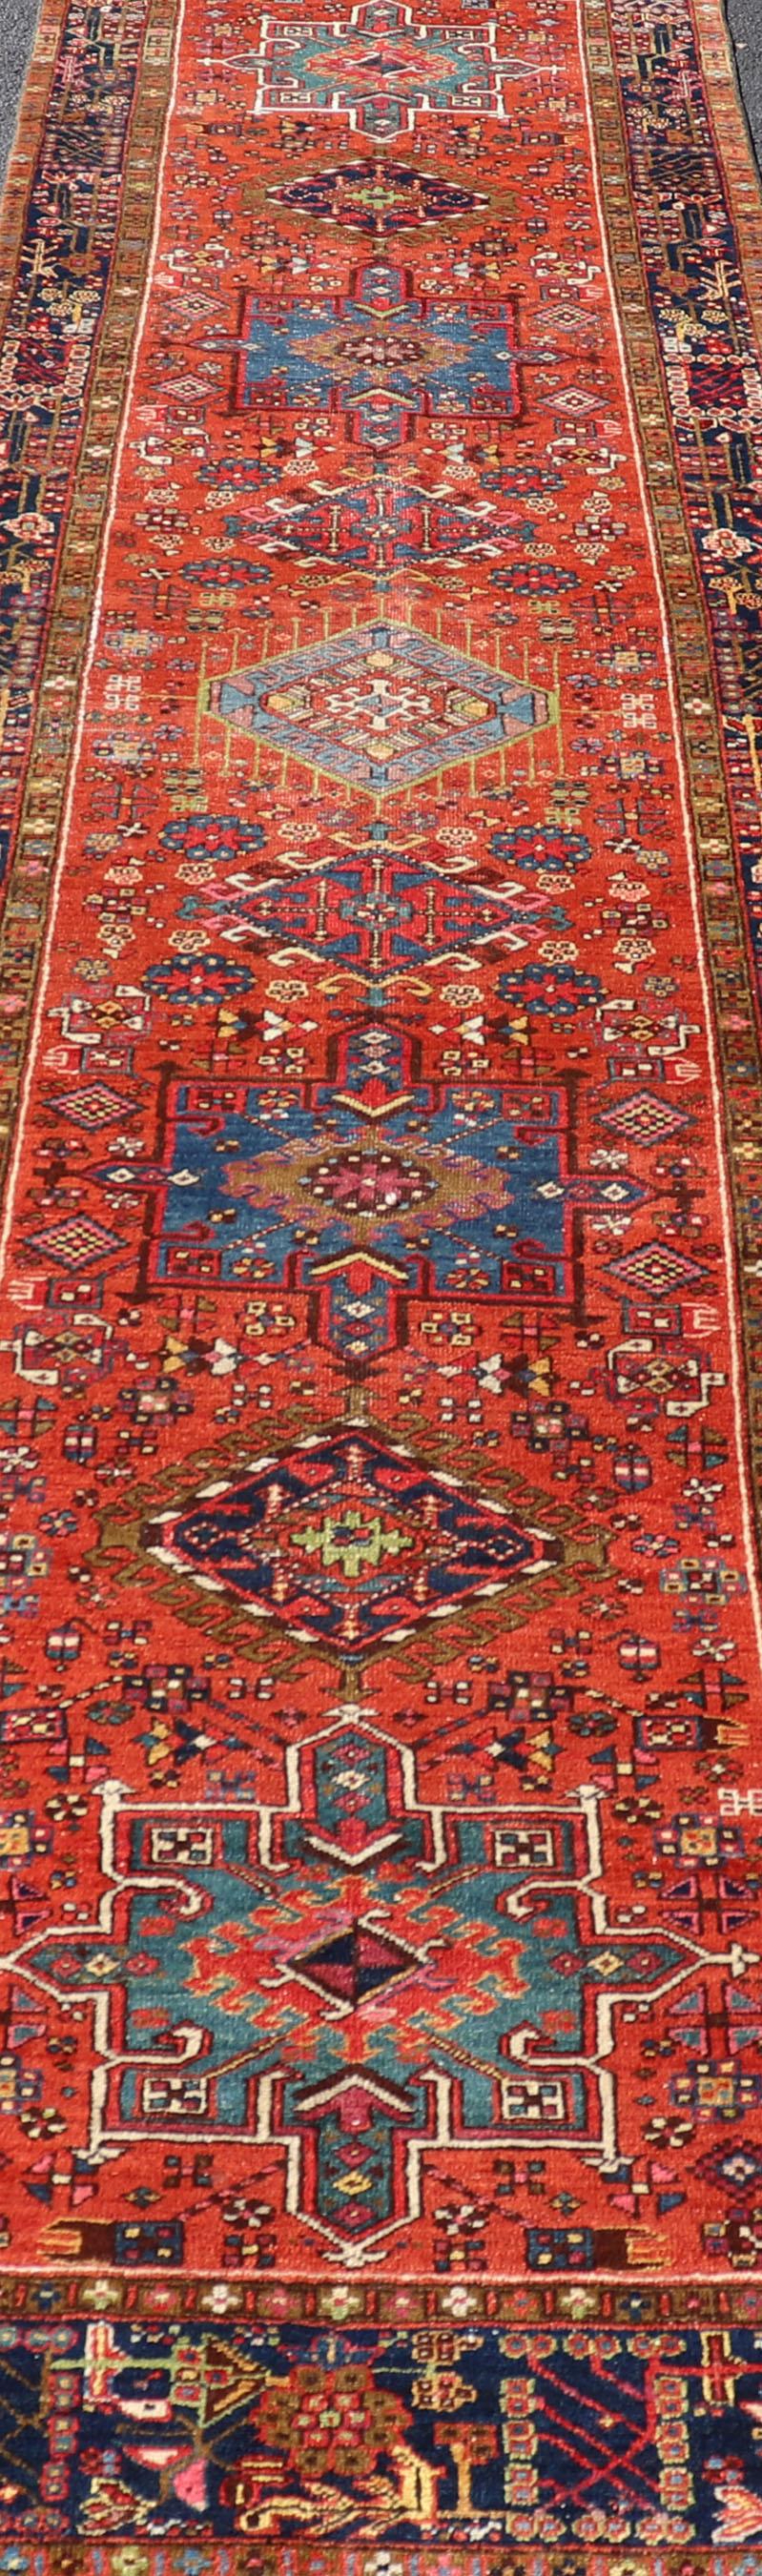 Antique Hand Knotted Geometric Persian Long Heriz Runner in Red, Blue and Teal For Sale 2